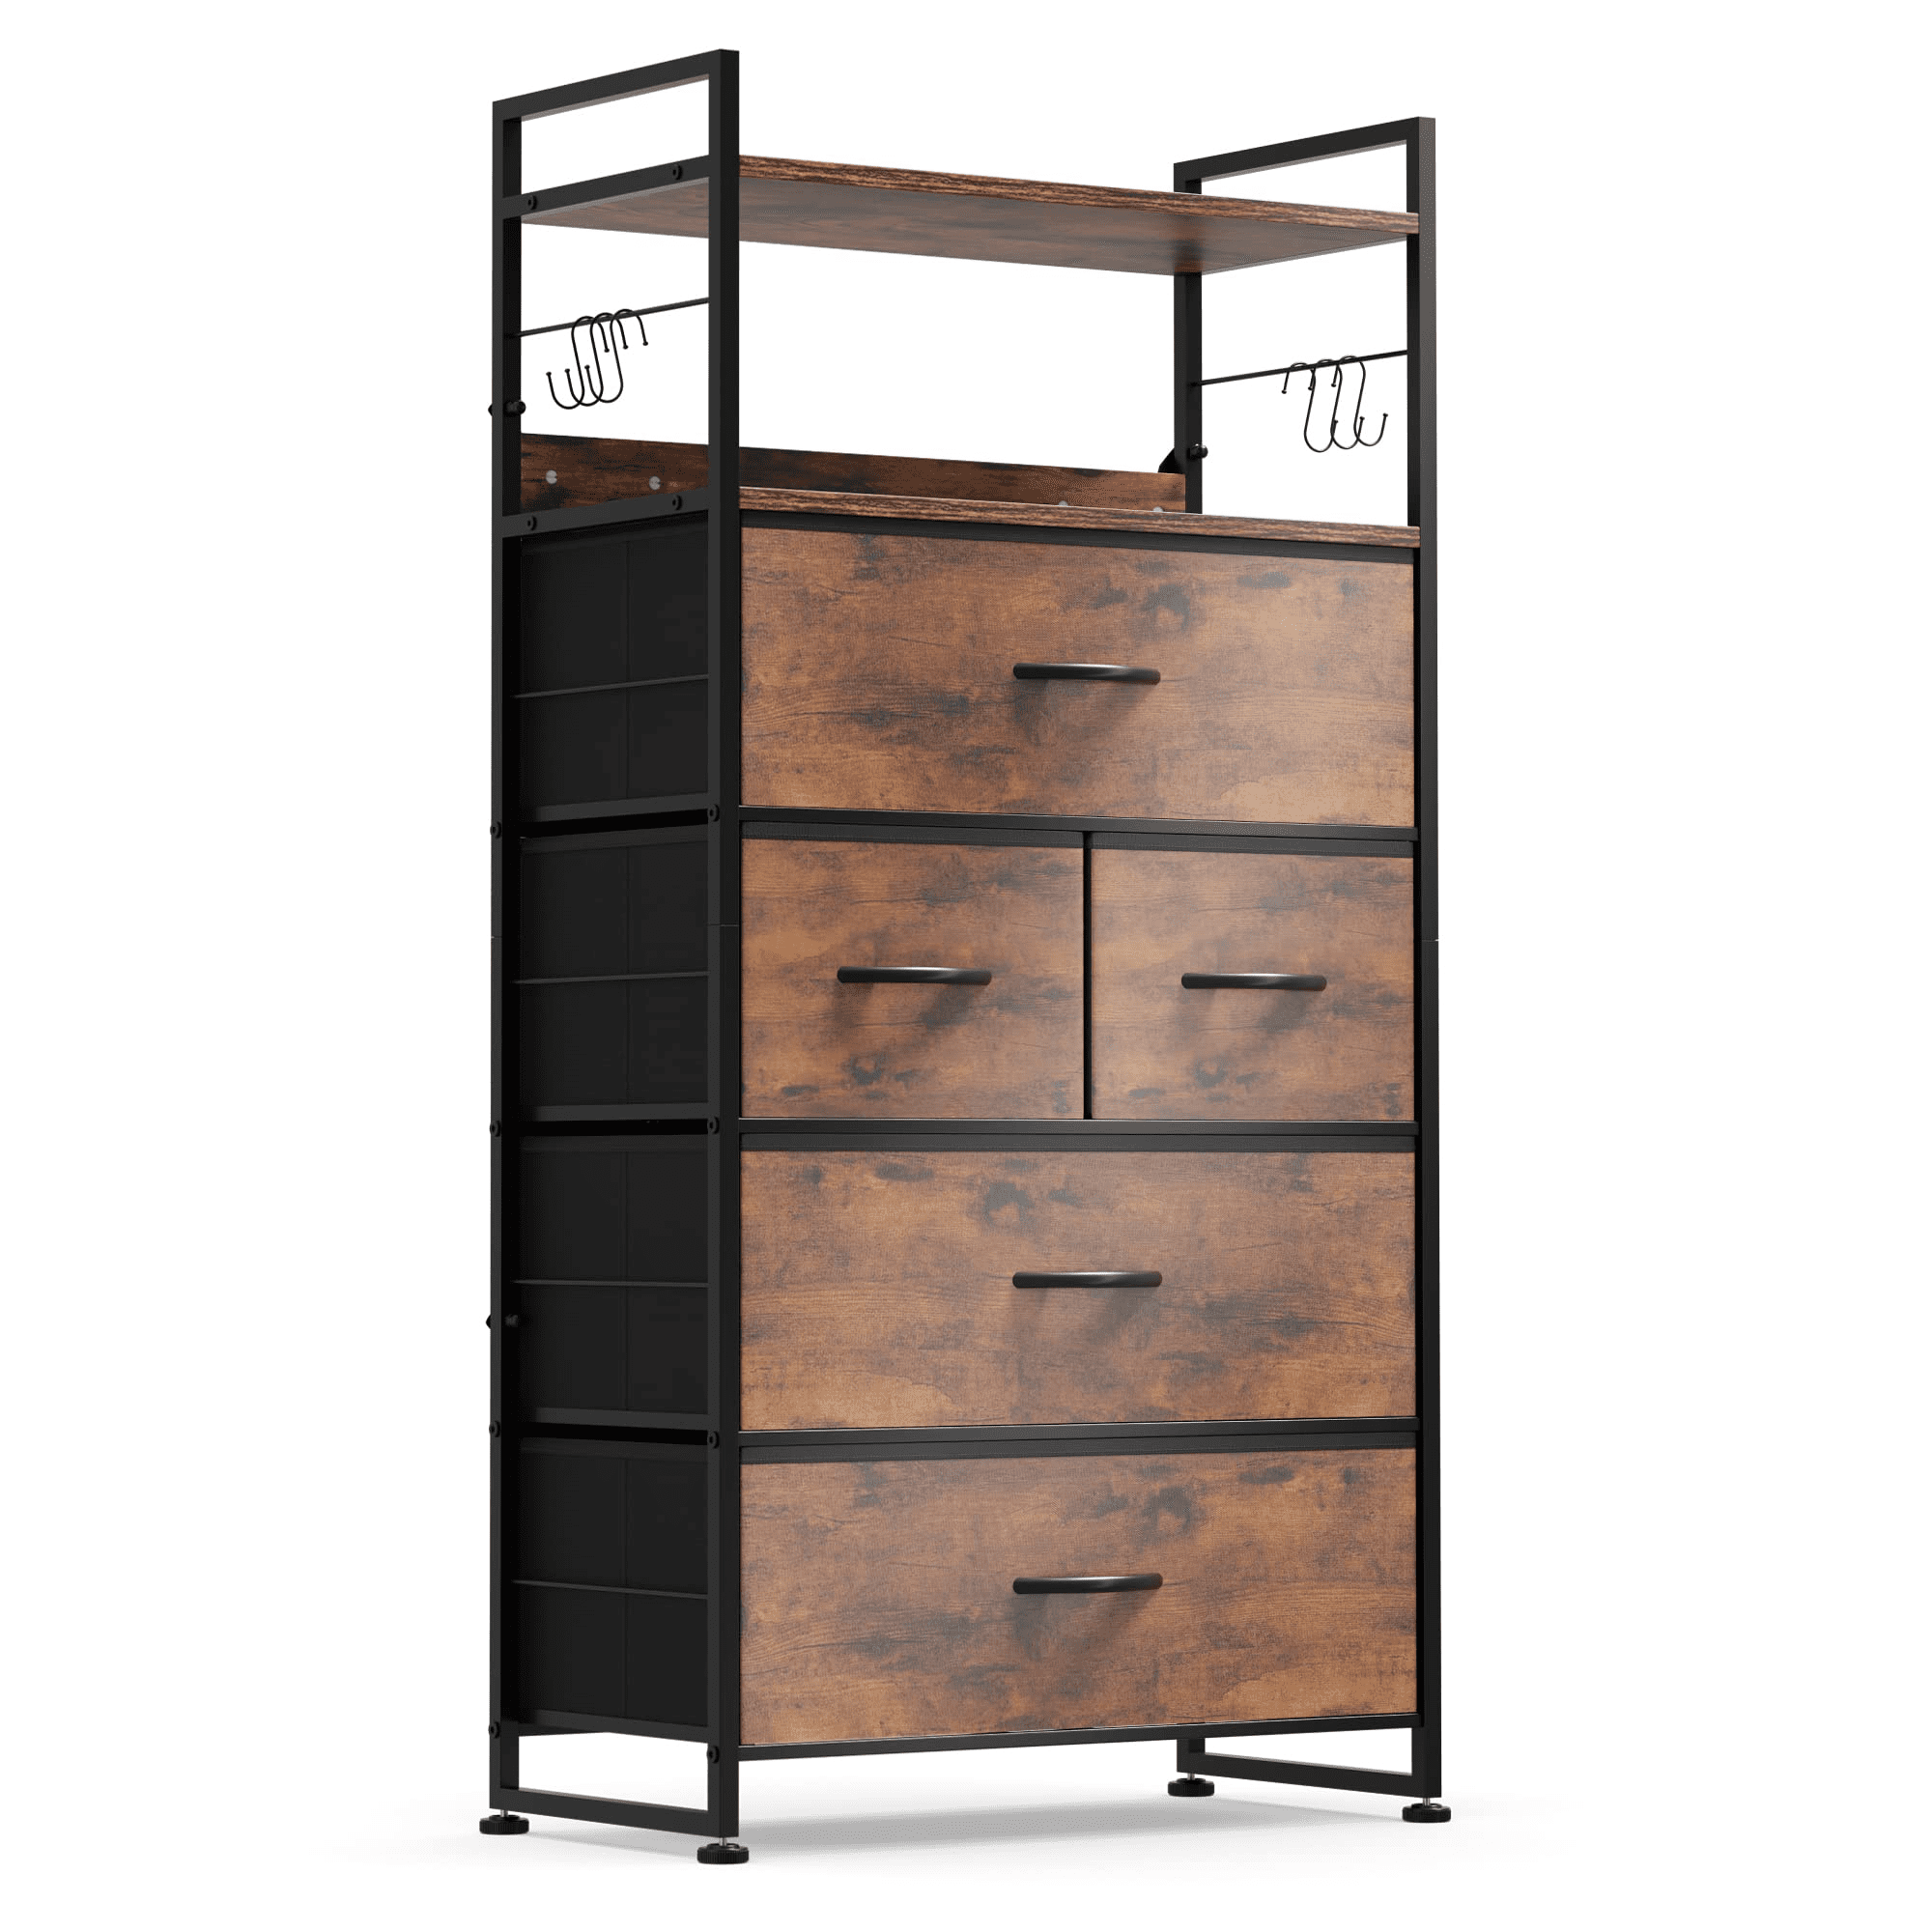 WLIVE Dresser for Bedroom with 8 Drawers, Tall Storage Tower with Drawer  Organizers, Side Pockets and Hooks, Fabric Dresser, Chest of Drawers for